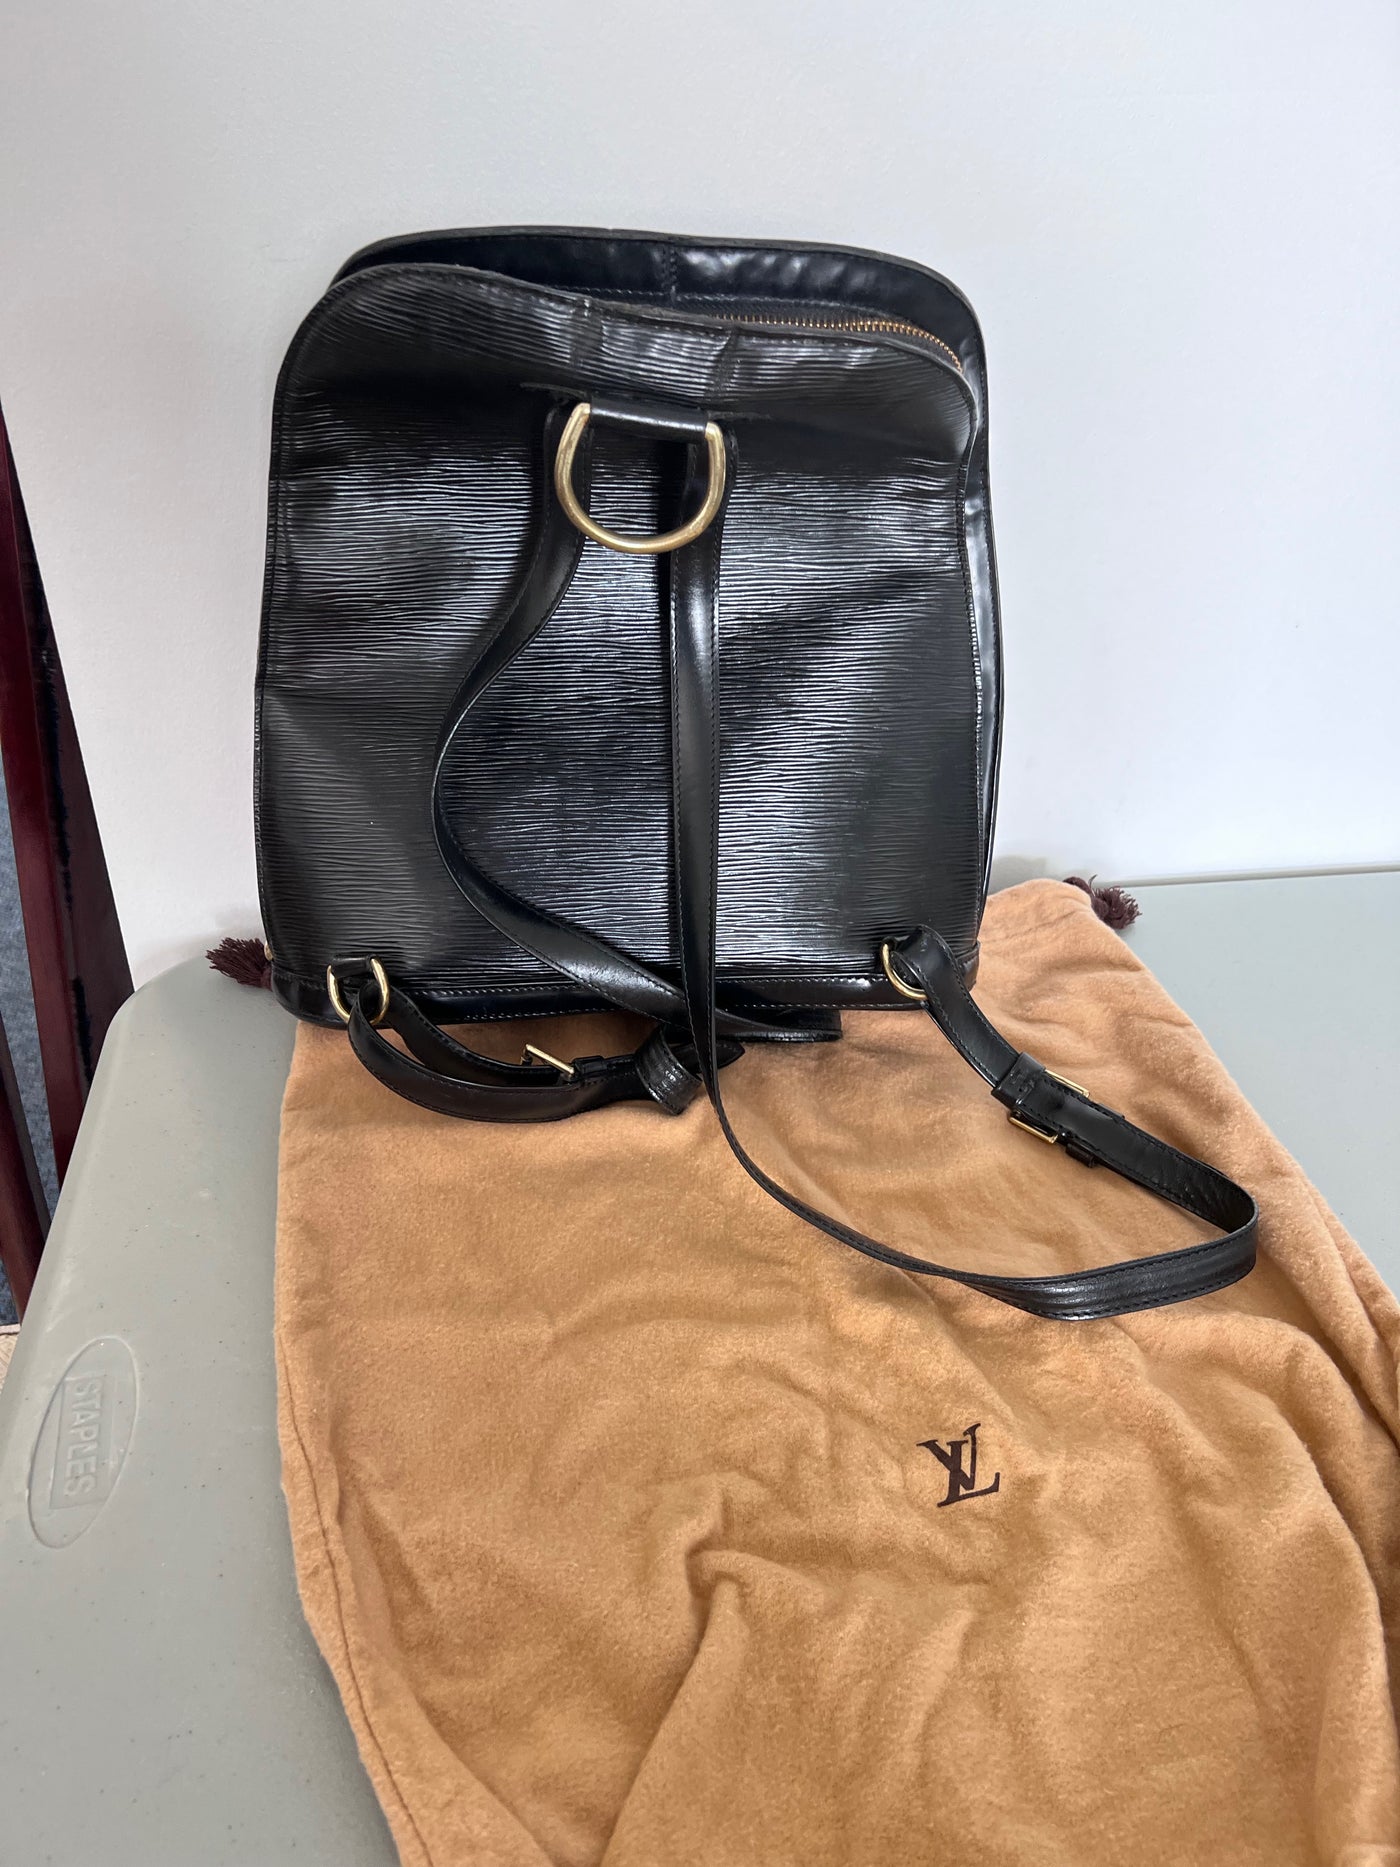 Gobelins vintage leather backpack Louis Vuitton Yellow in Leather